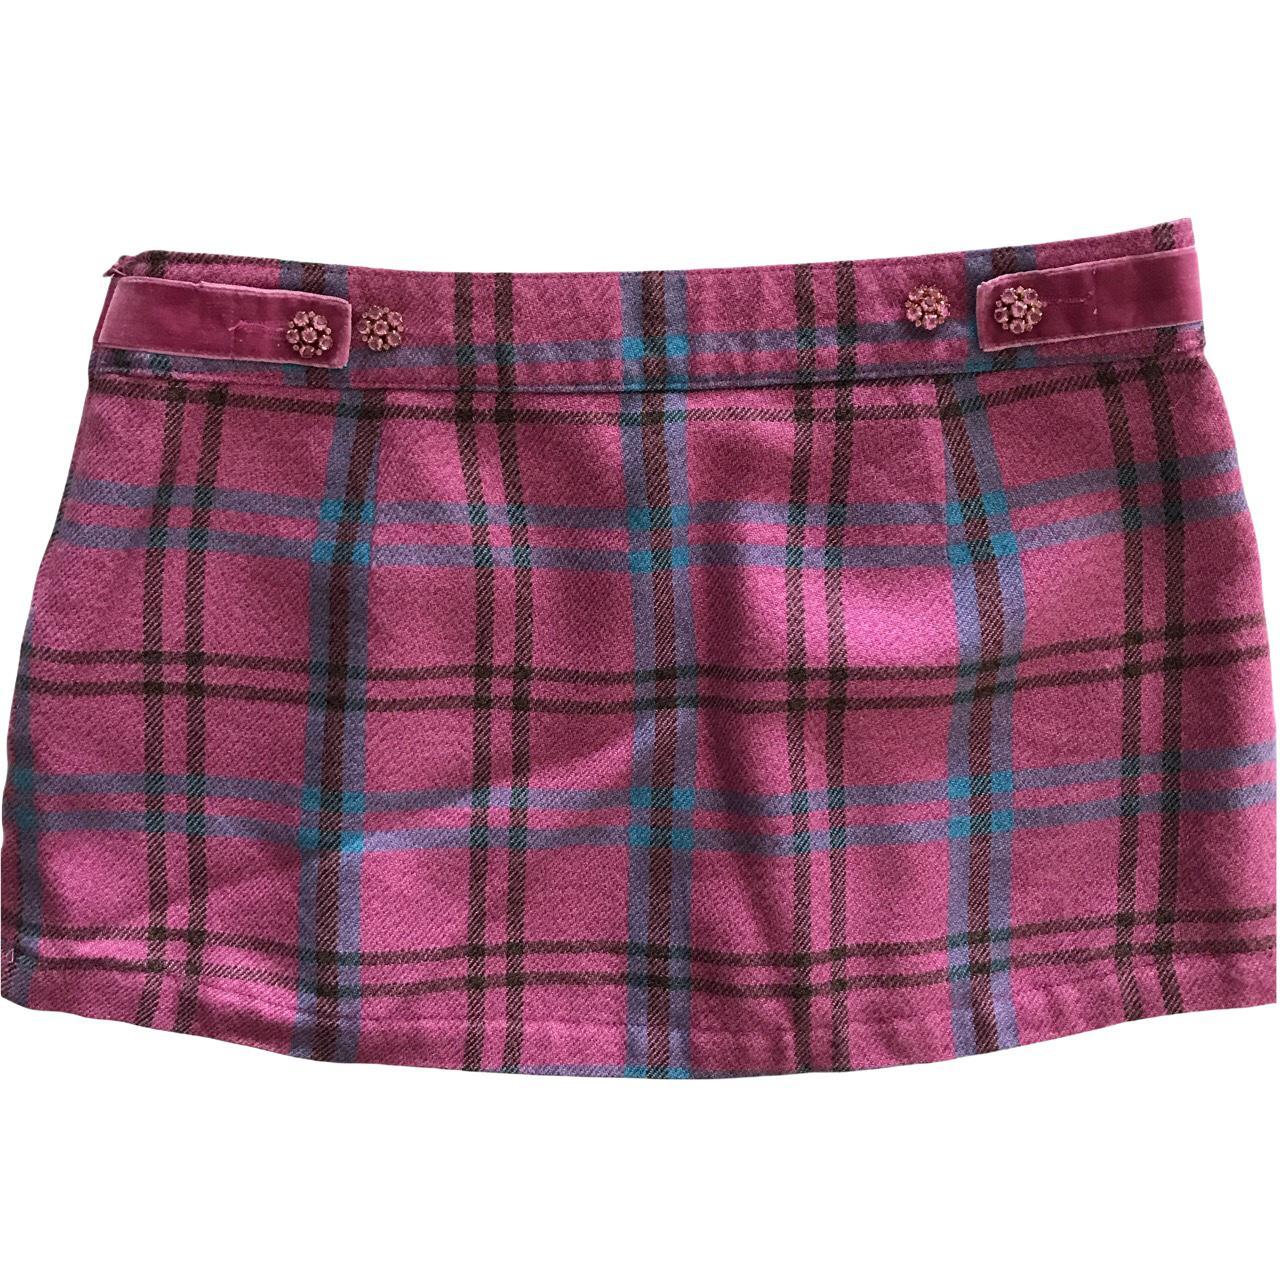 Abercrombie & Fitch Women's Pink and Blue Skirt (3)